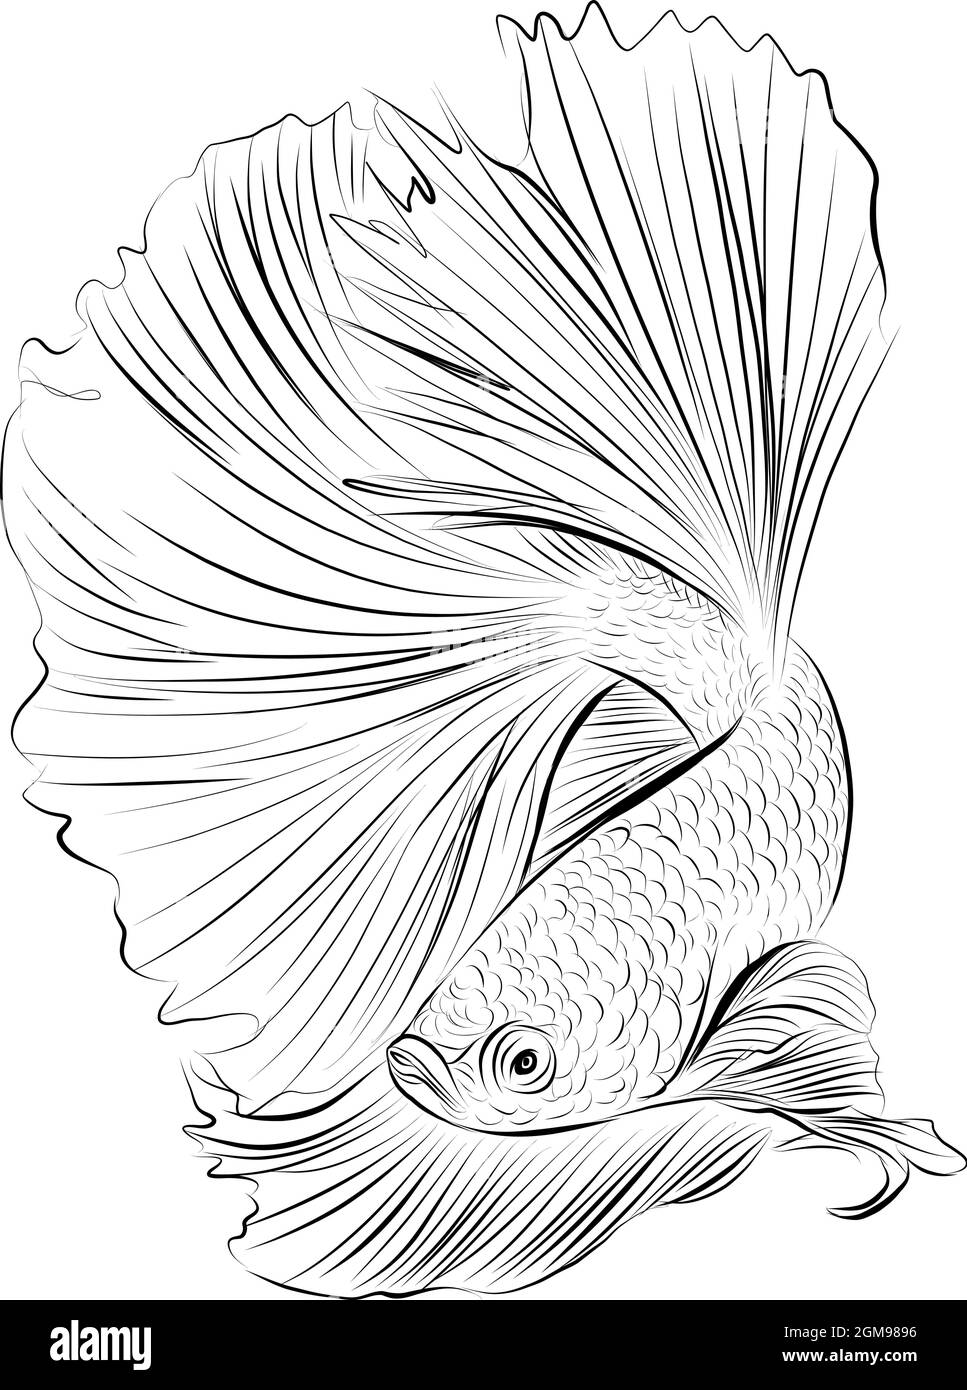 Siamese fighting fish drawing Cut Out Stock Images & Pictures - Alamy